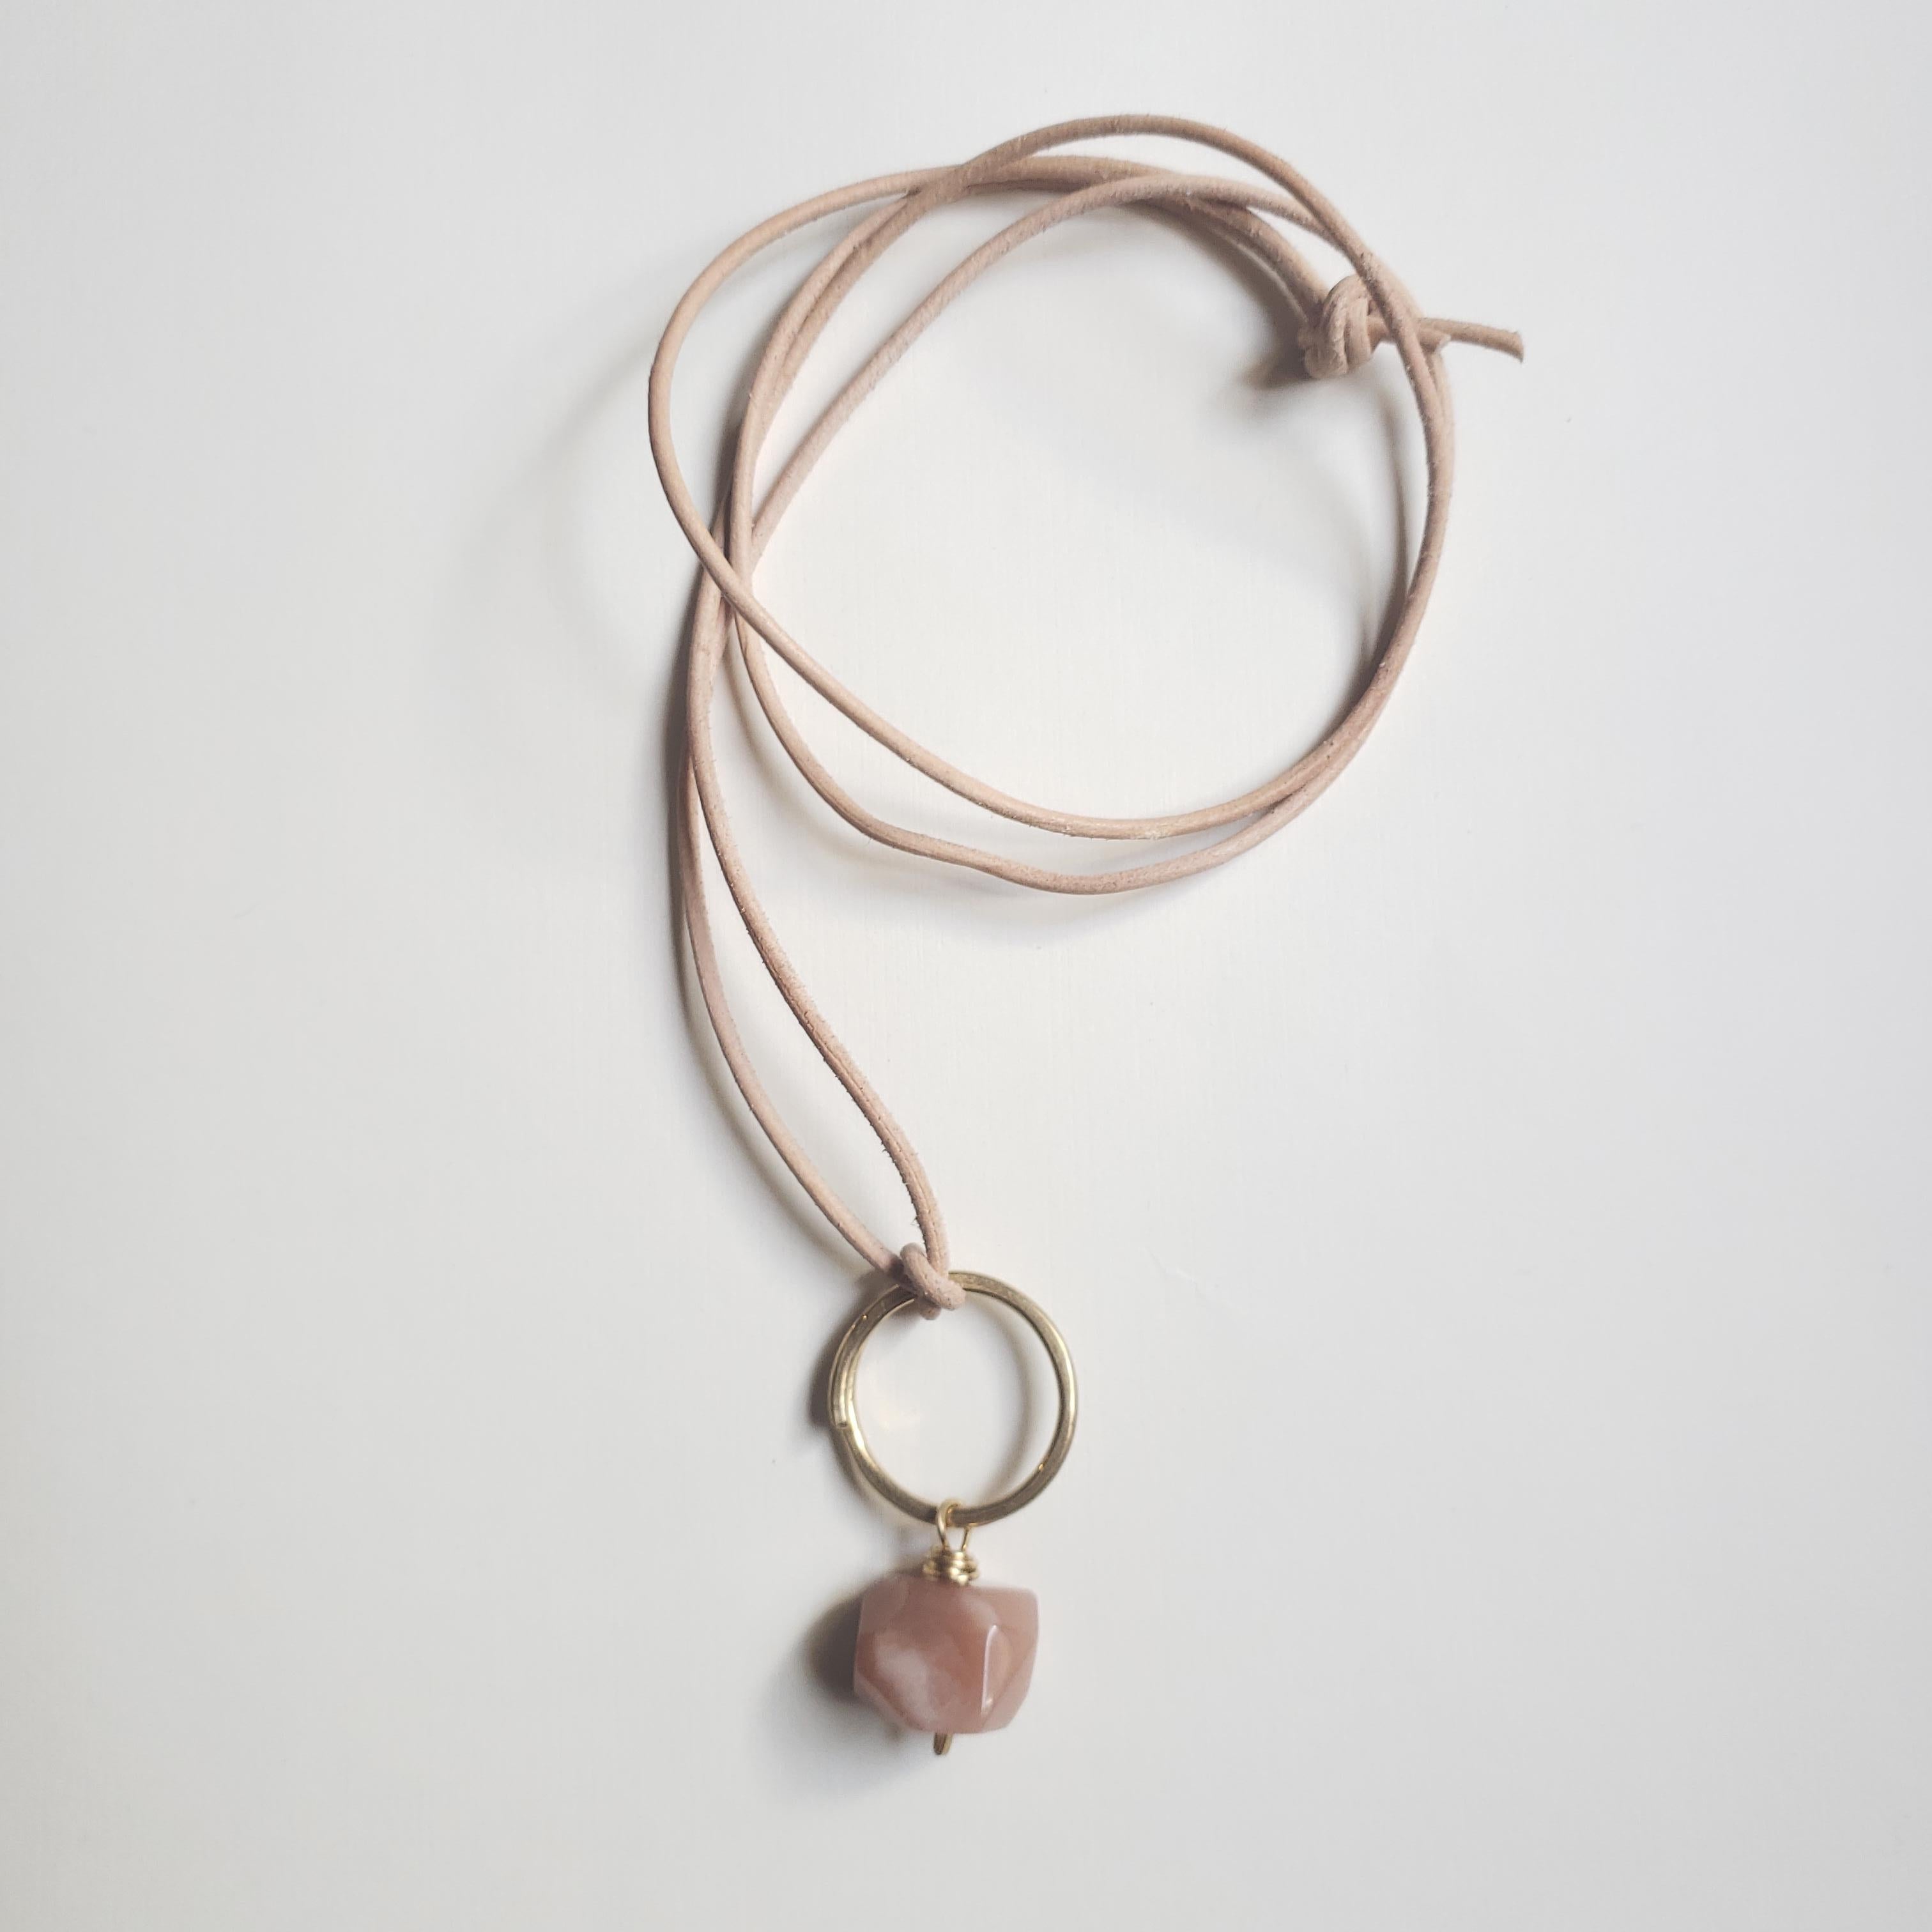 Moonstone is a very powerful stone for the sacral chakra. It aids the wearer in letting go of heavy emotions and restores inner peace. Peach Moonstone is extra soothing to the sacral chakra; boosting creativity and passion. This piece is a part of